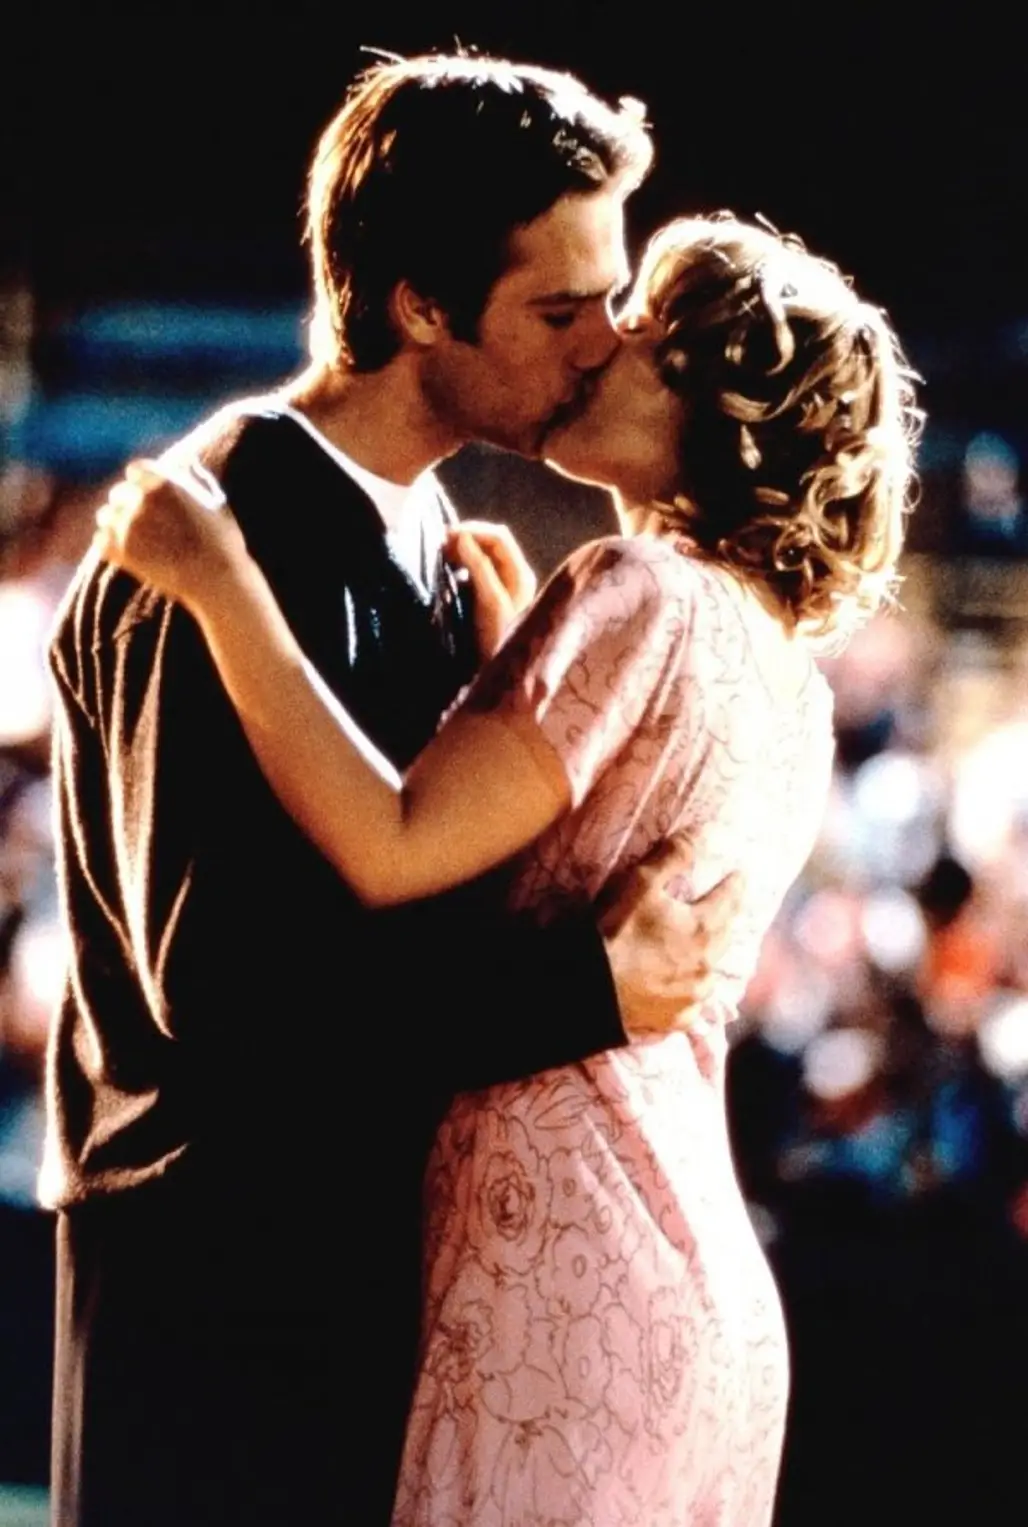 Josie and Sam, "Never Been Kissed"